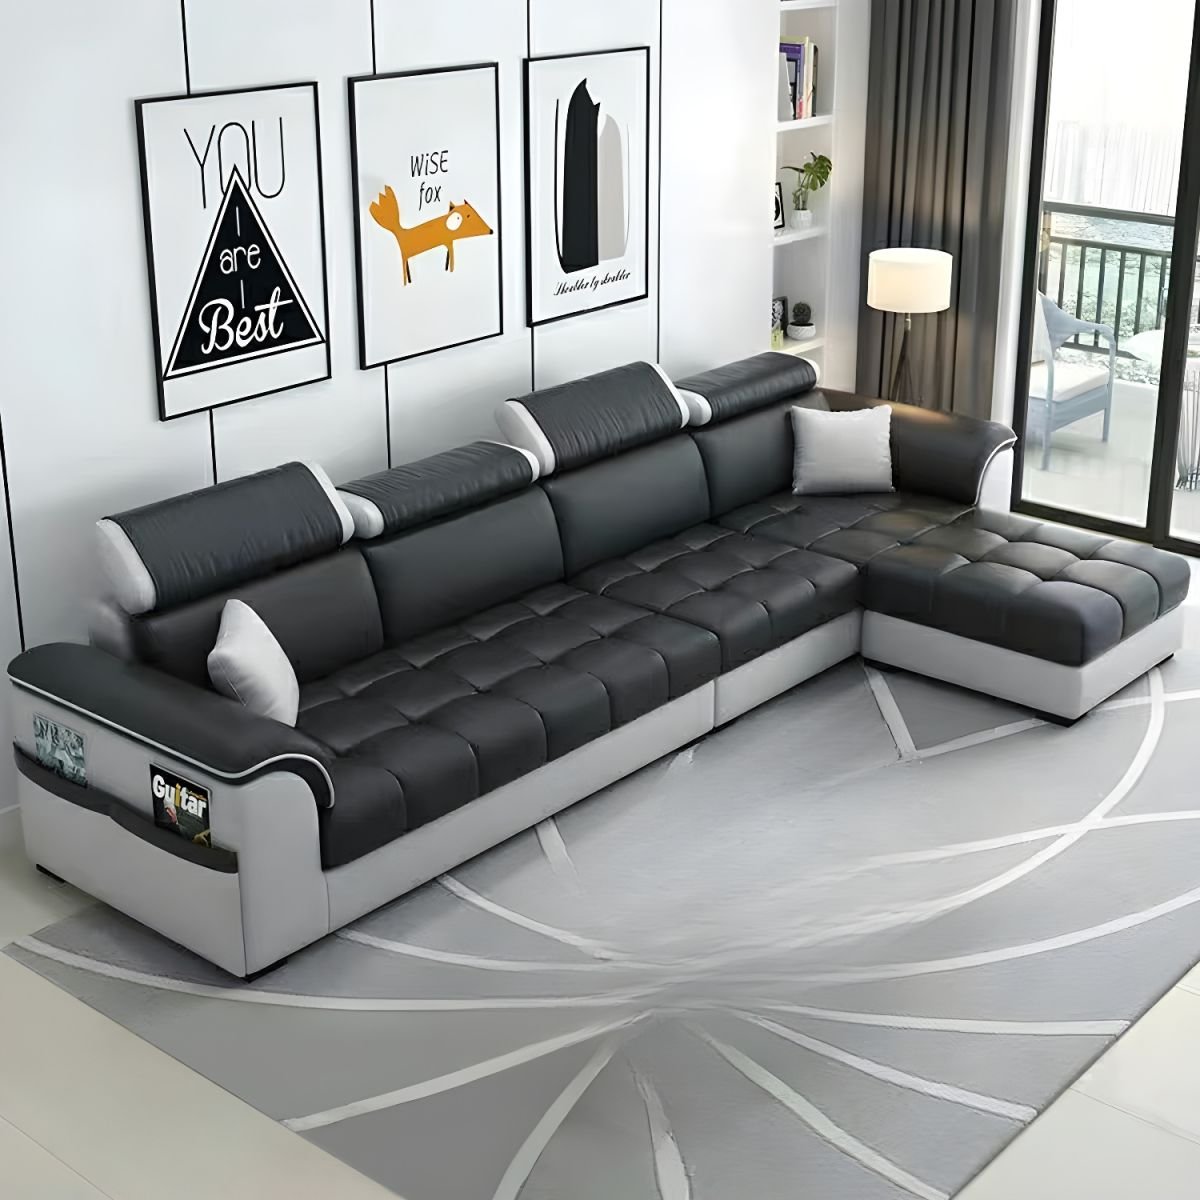 Contemporary L-Shaped Sectional Sofa with Adjustable Pillows and Storage - Tech Cloth Dark Grey/ Light Grey